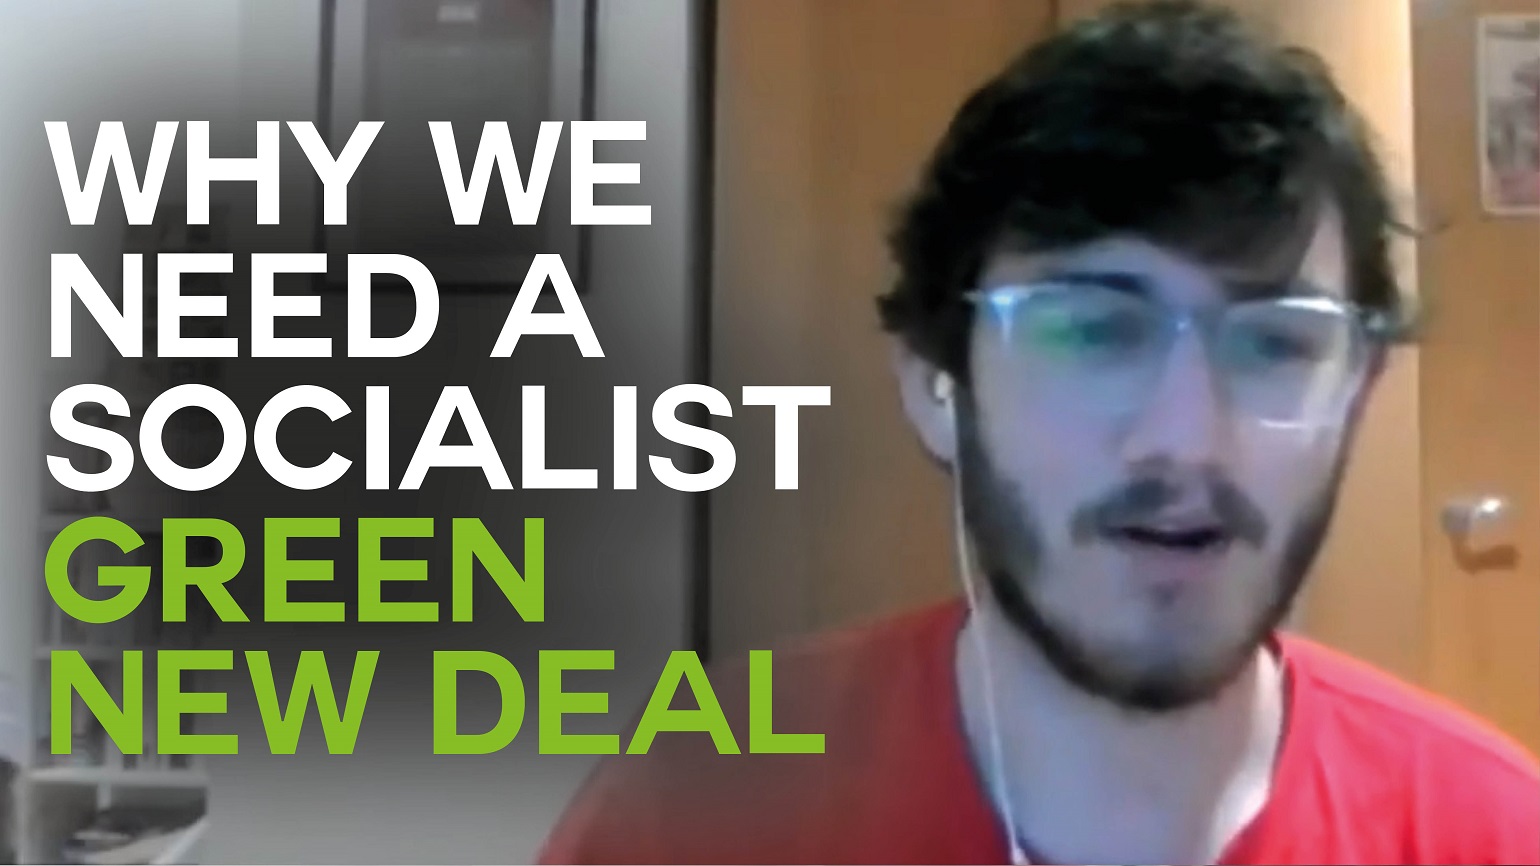 A still from an interview with Chris Saltmarsh with text reading "Why we need a socialist Green New Deal"